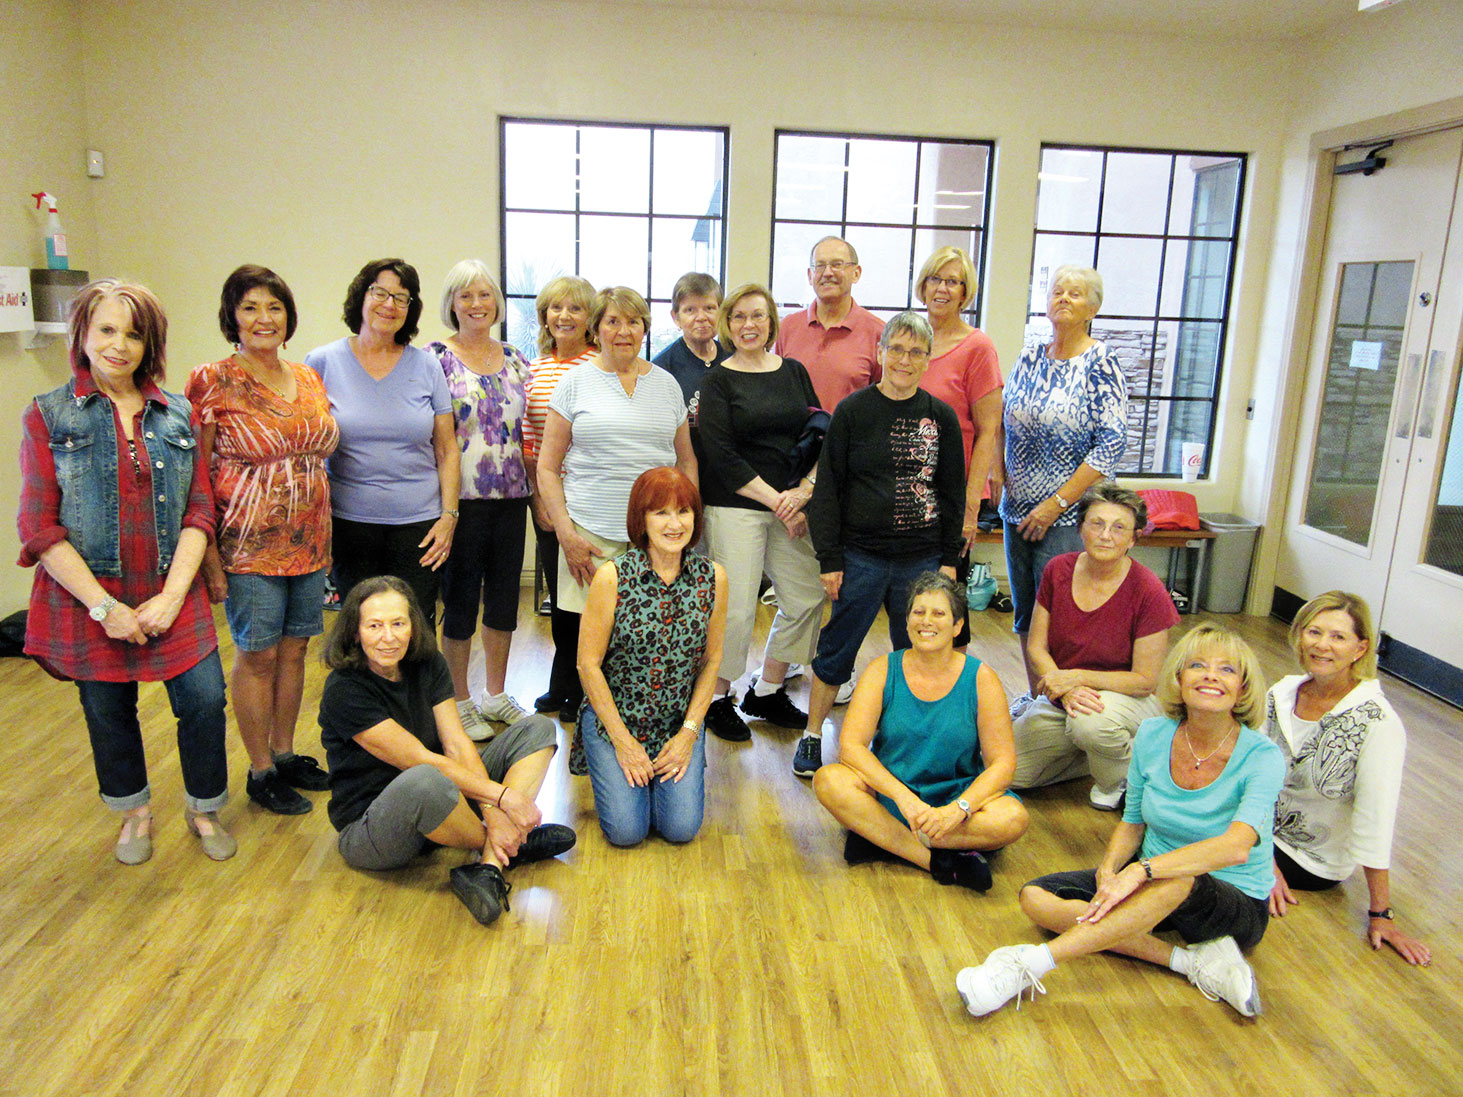 Thursdays in the MountainView aerobics room are a busy time. Here are the smiling faces of the highest level group of line dancers with Rebecca Magdanz (SaddleBrooke Line Dance Instructor). There are three skill levels and these folks are the creme de la crème.